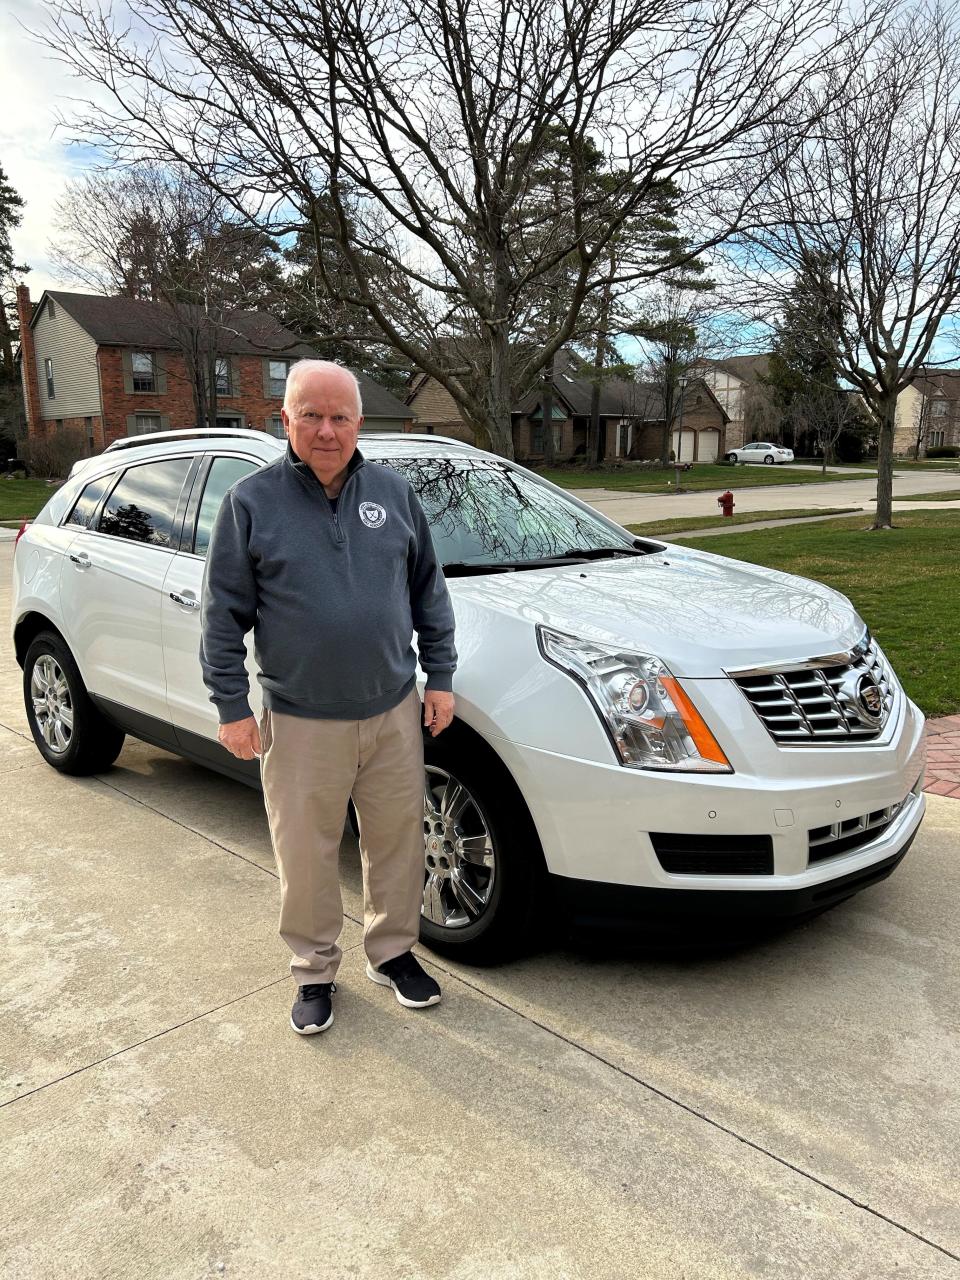 Will Lindley, of Livonia, was considering trading in his wife's 2016 Cadillac SRX (pictured here) for an electric vehicle, but he said it won't be a General Motors EV if it does not have Apple CarPlay.